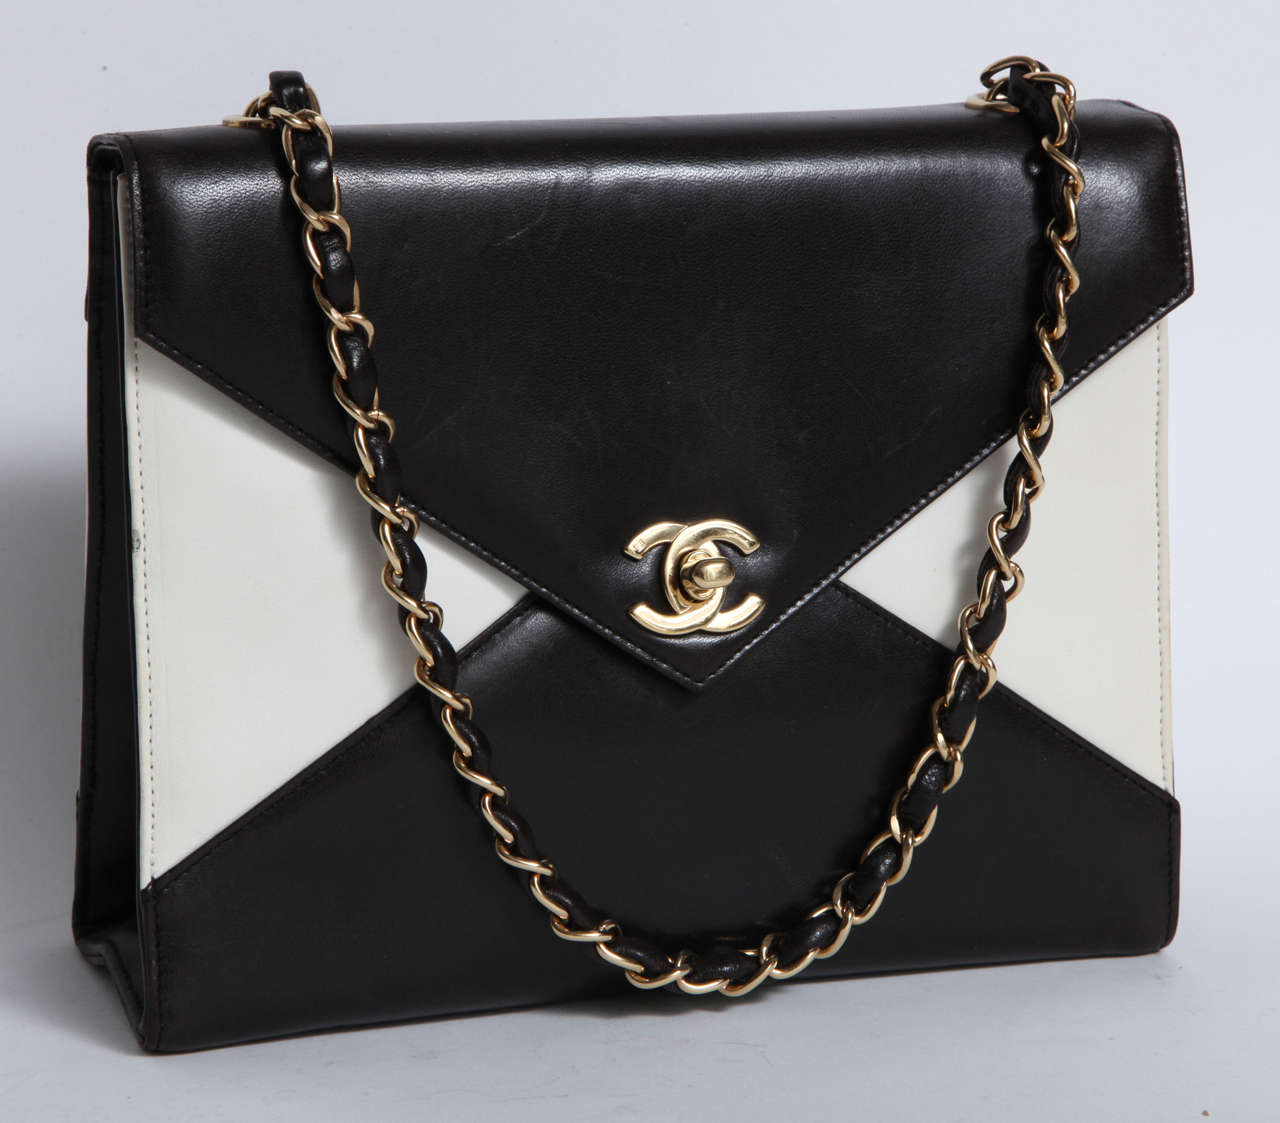 A stylish vintage black and white Chanel bag with 15